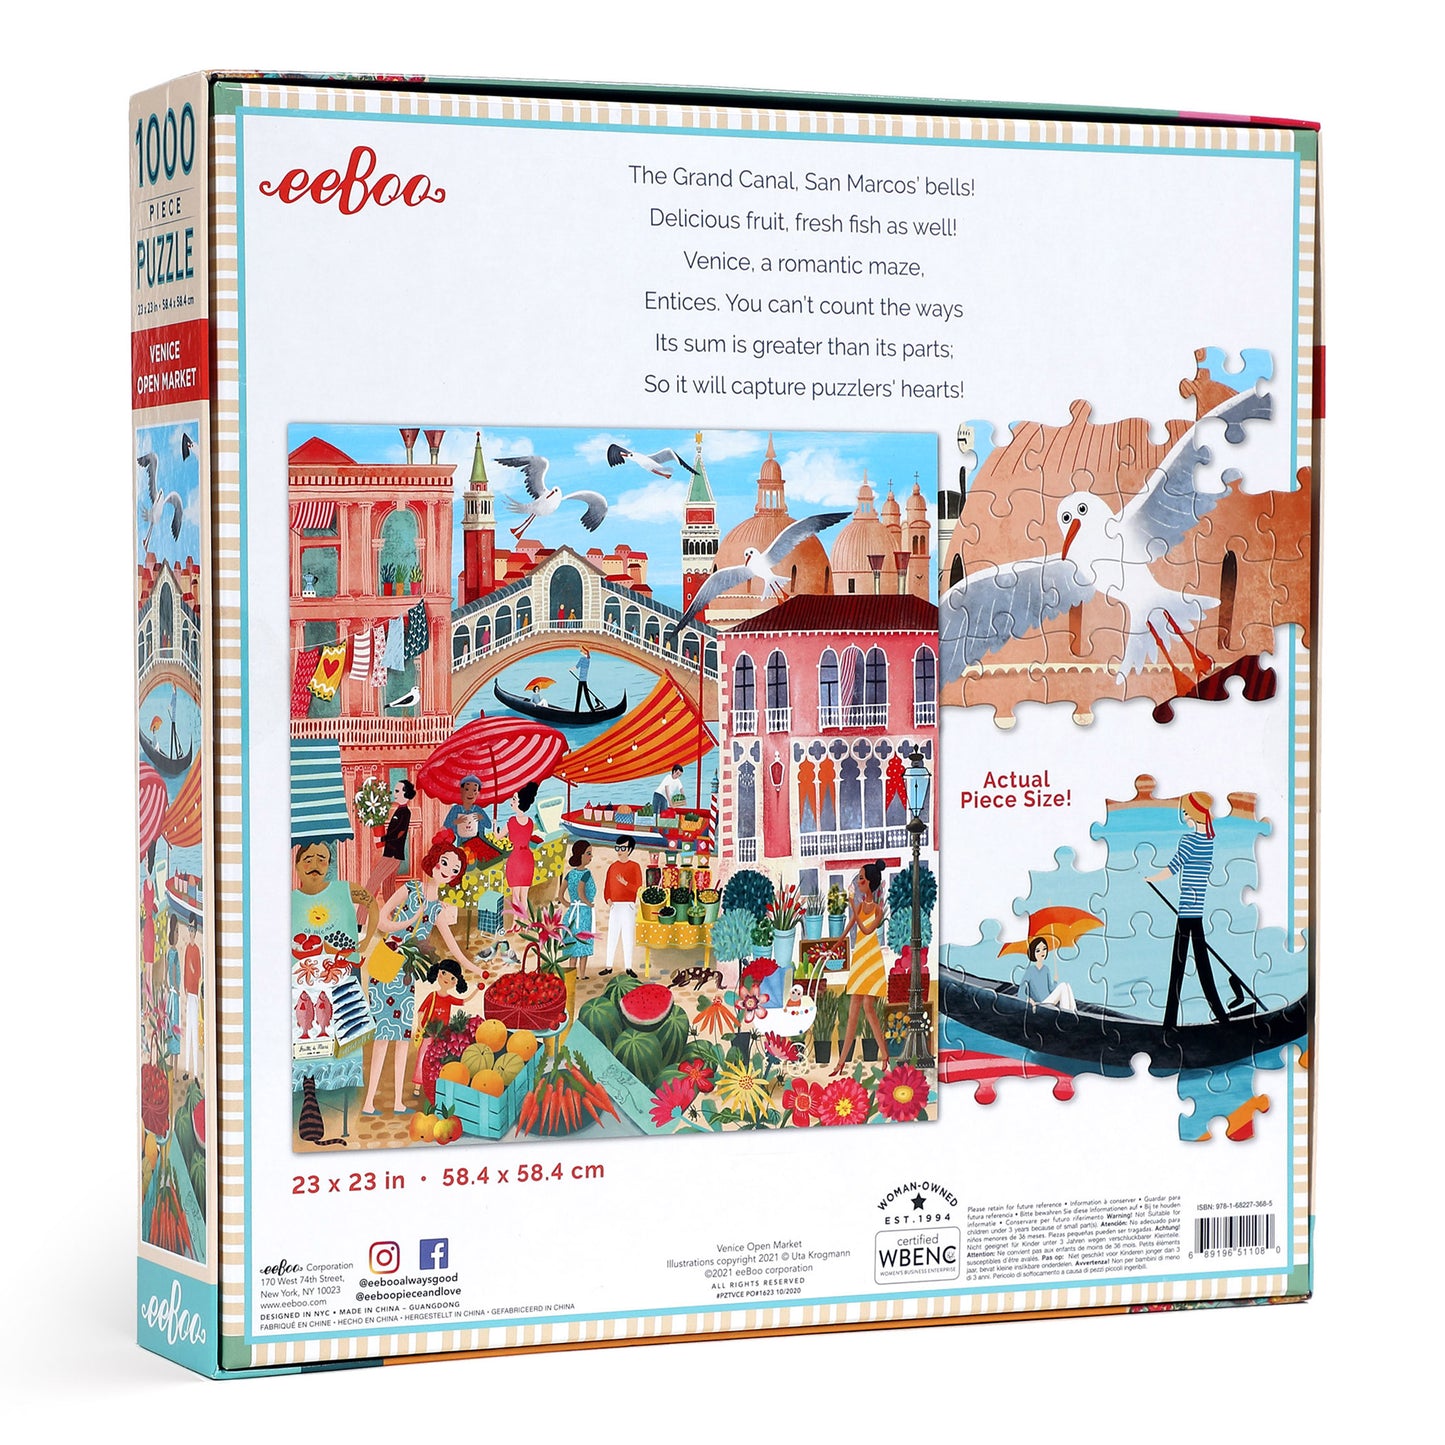 Venice Italy Open Market 1000 Piece Jigsaw Puzzle | eeBoo Piece & Love | Gifts for Travel Lovers